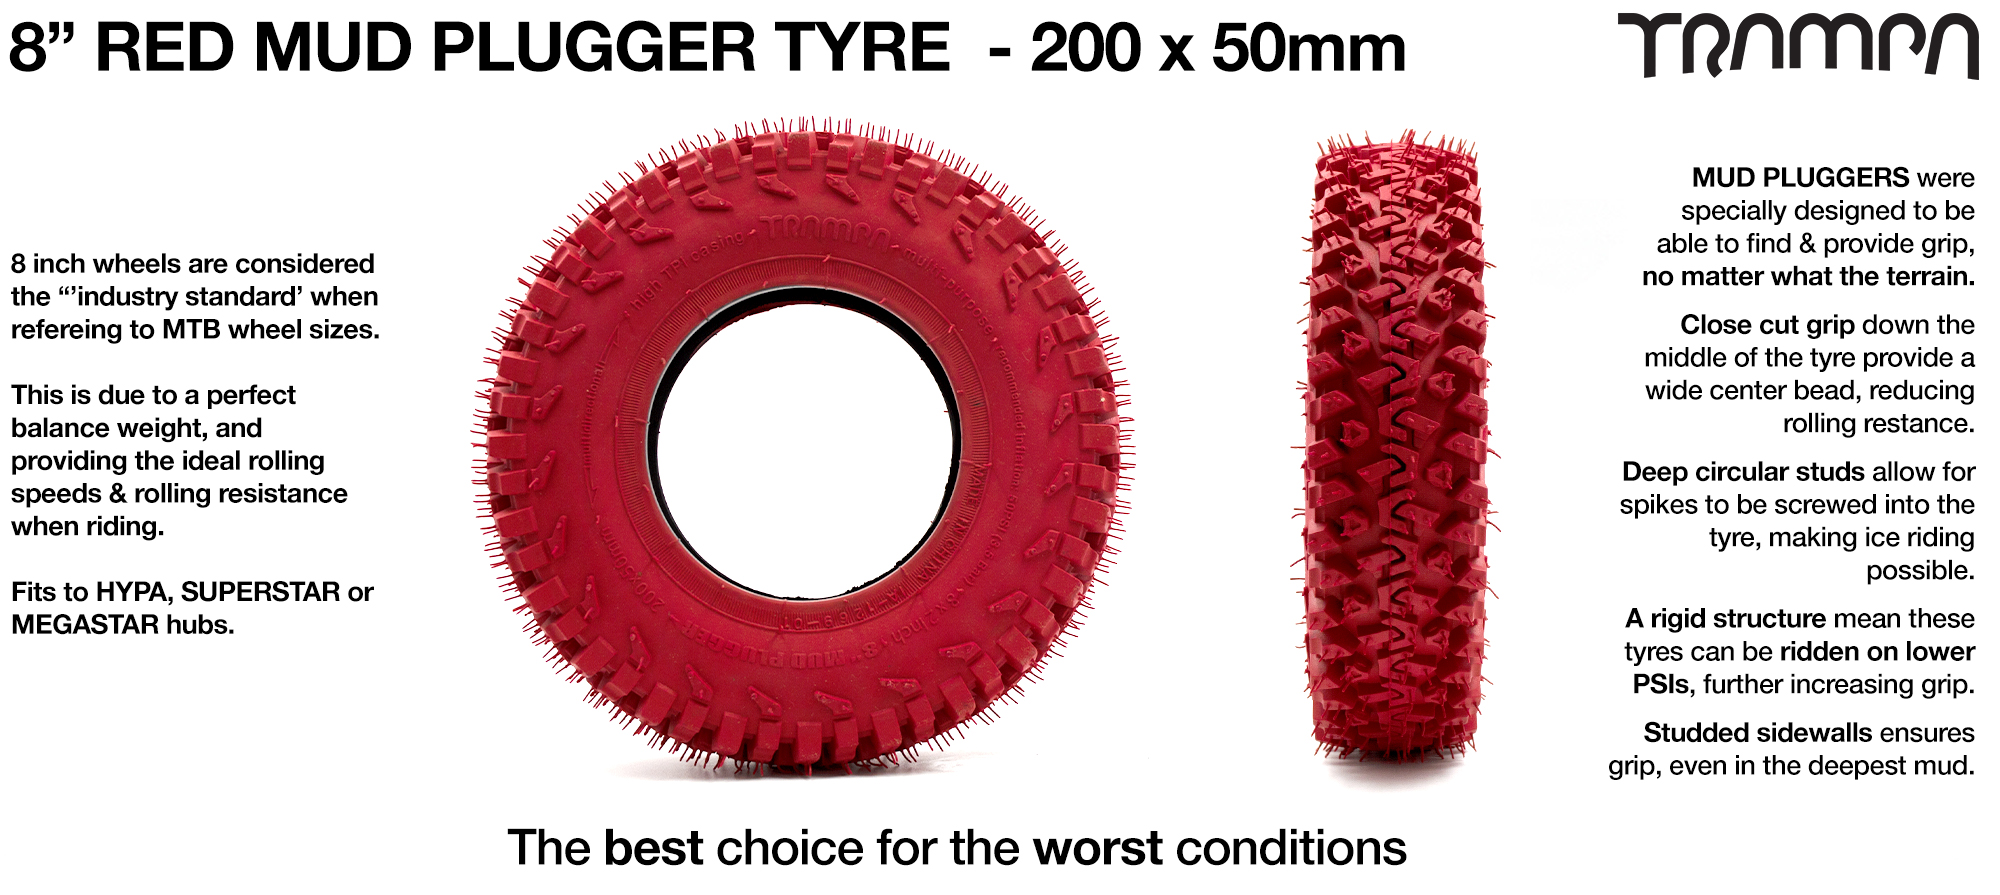 TRAMPA MUD-PLUGGER 8 Inch Tyre measure 3.75x 2x 8 Inch or 200x50mm with 3.75 inch Rim fits all 3.75 inch Hubs - RED